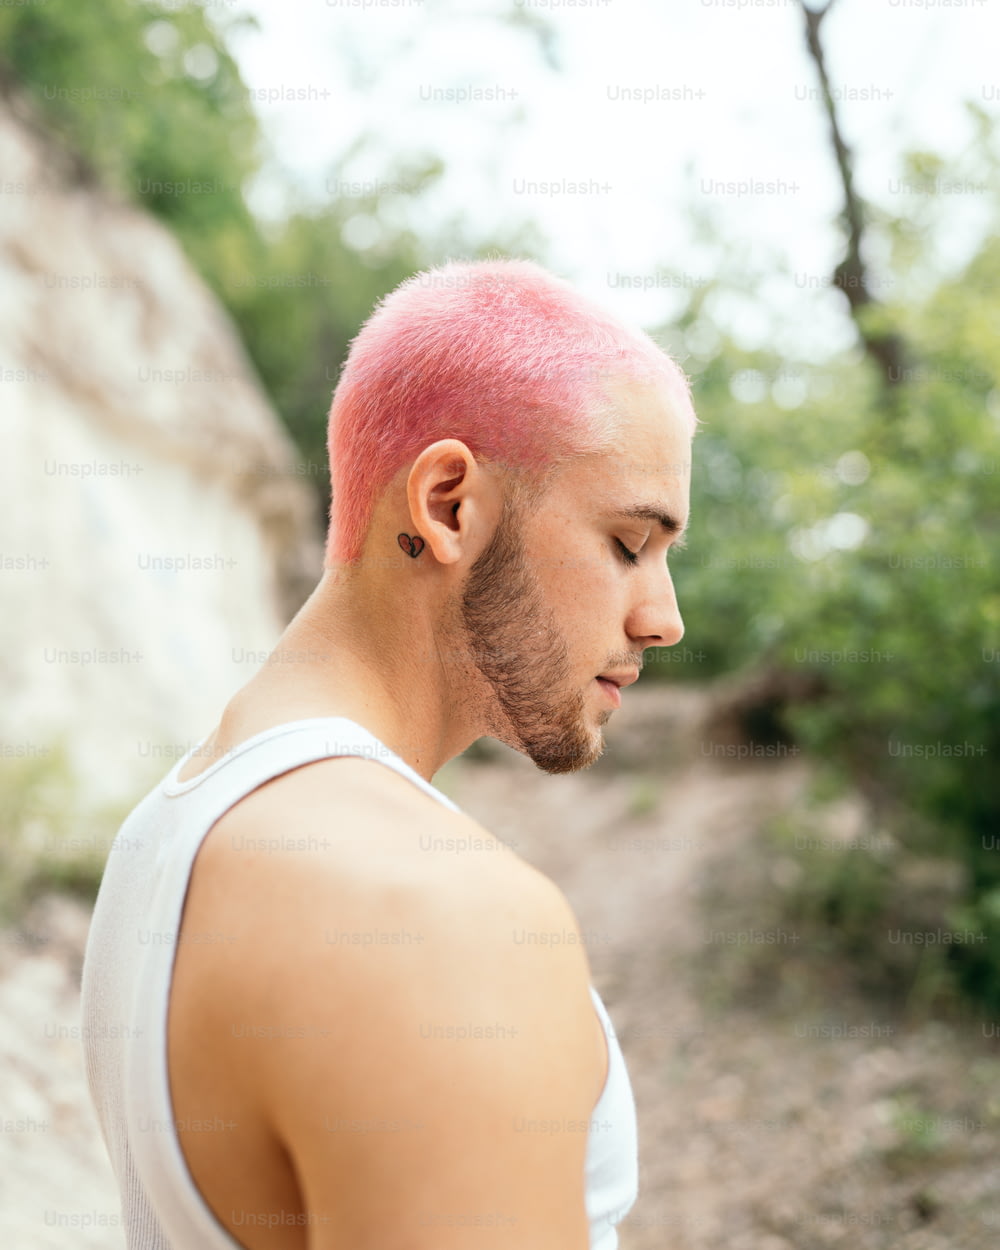 a man with pink hair and a white tank top